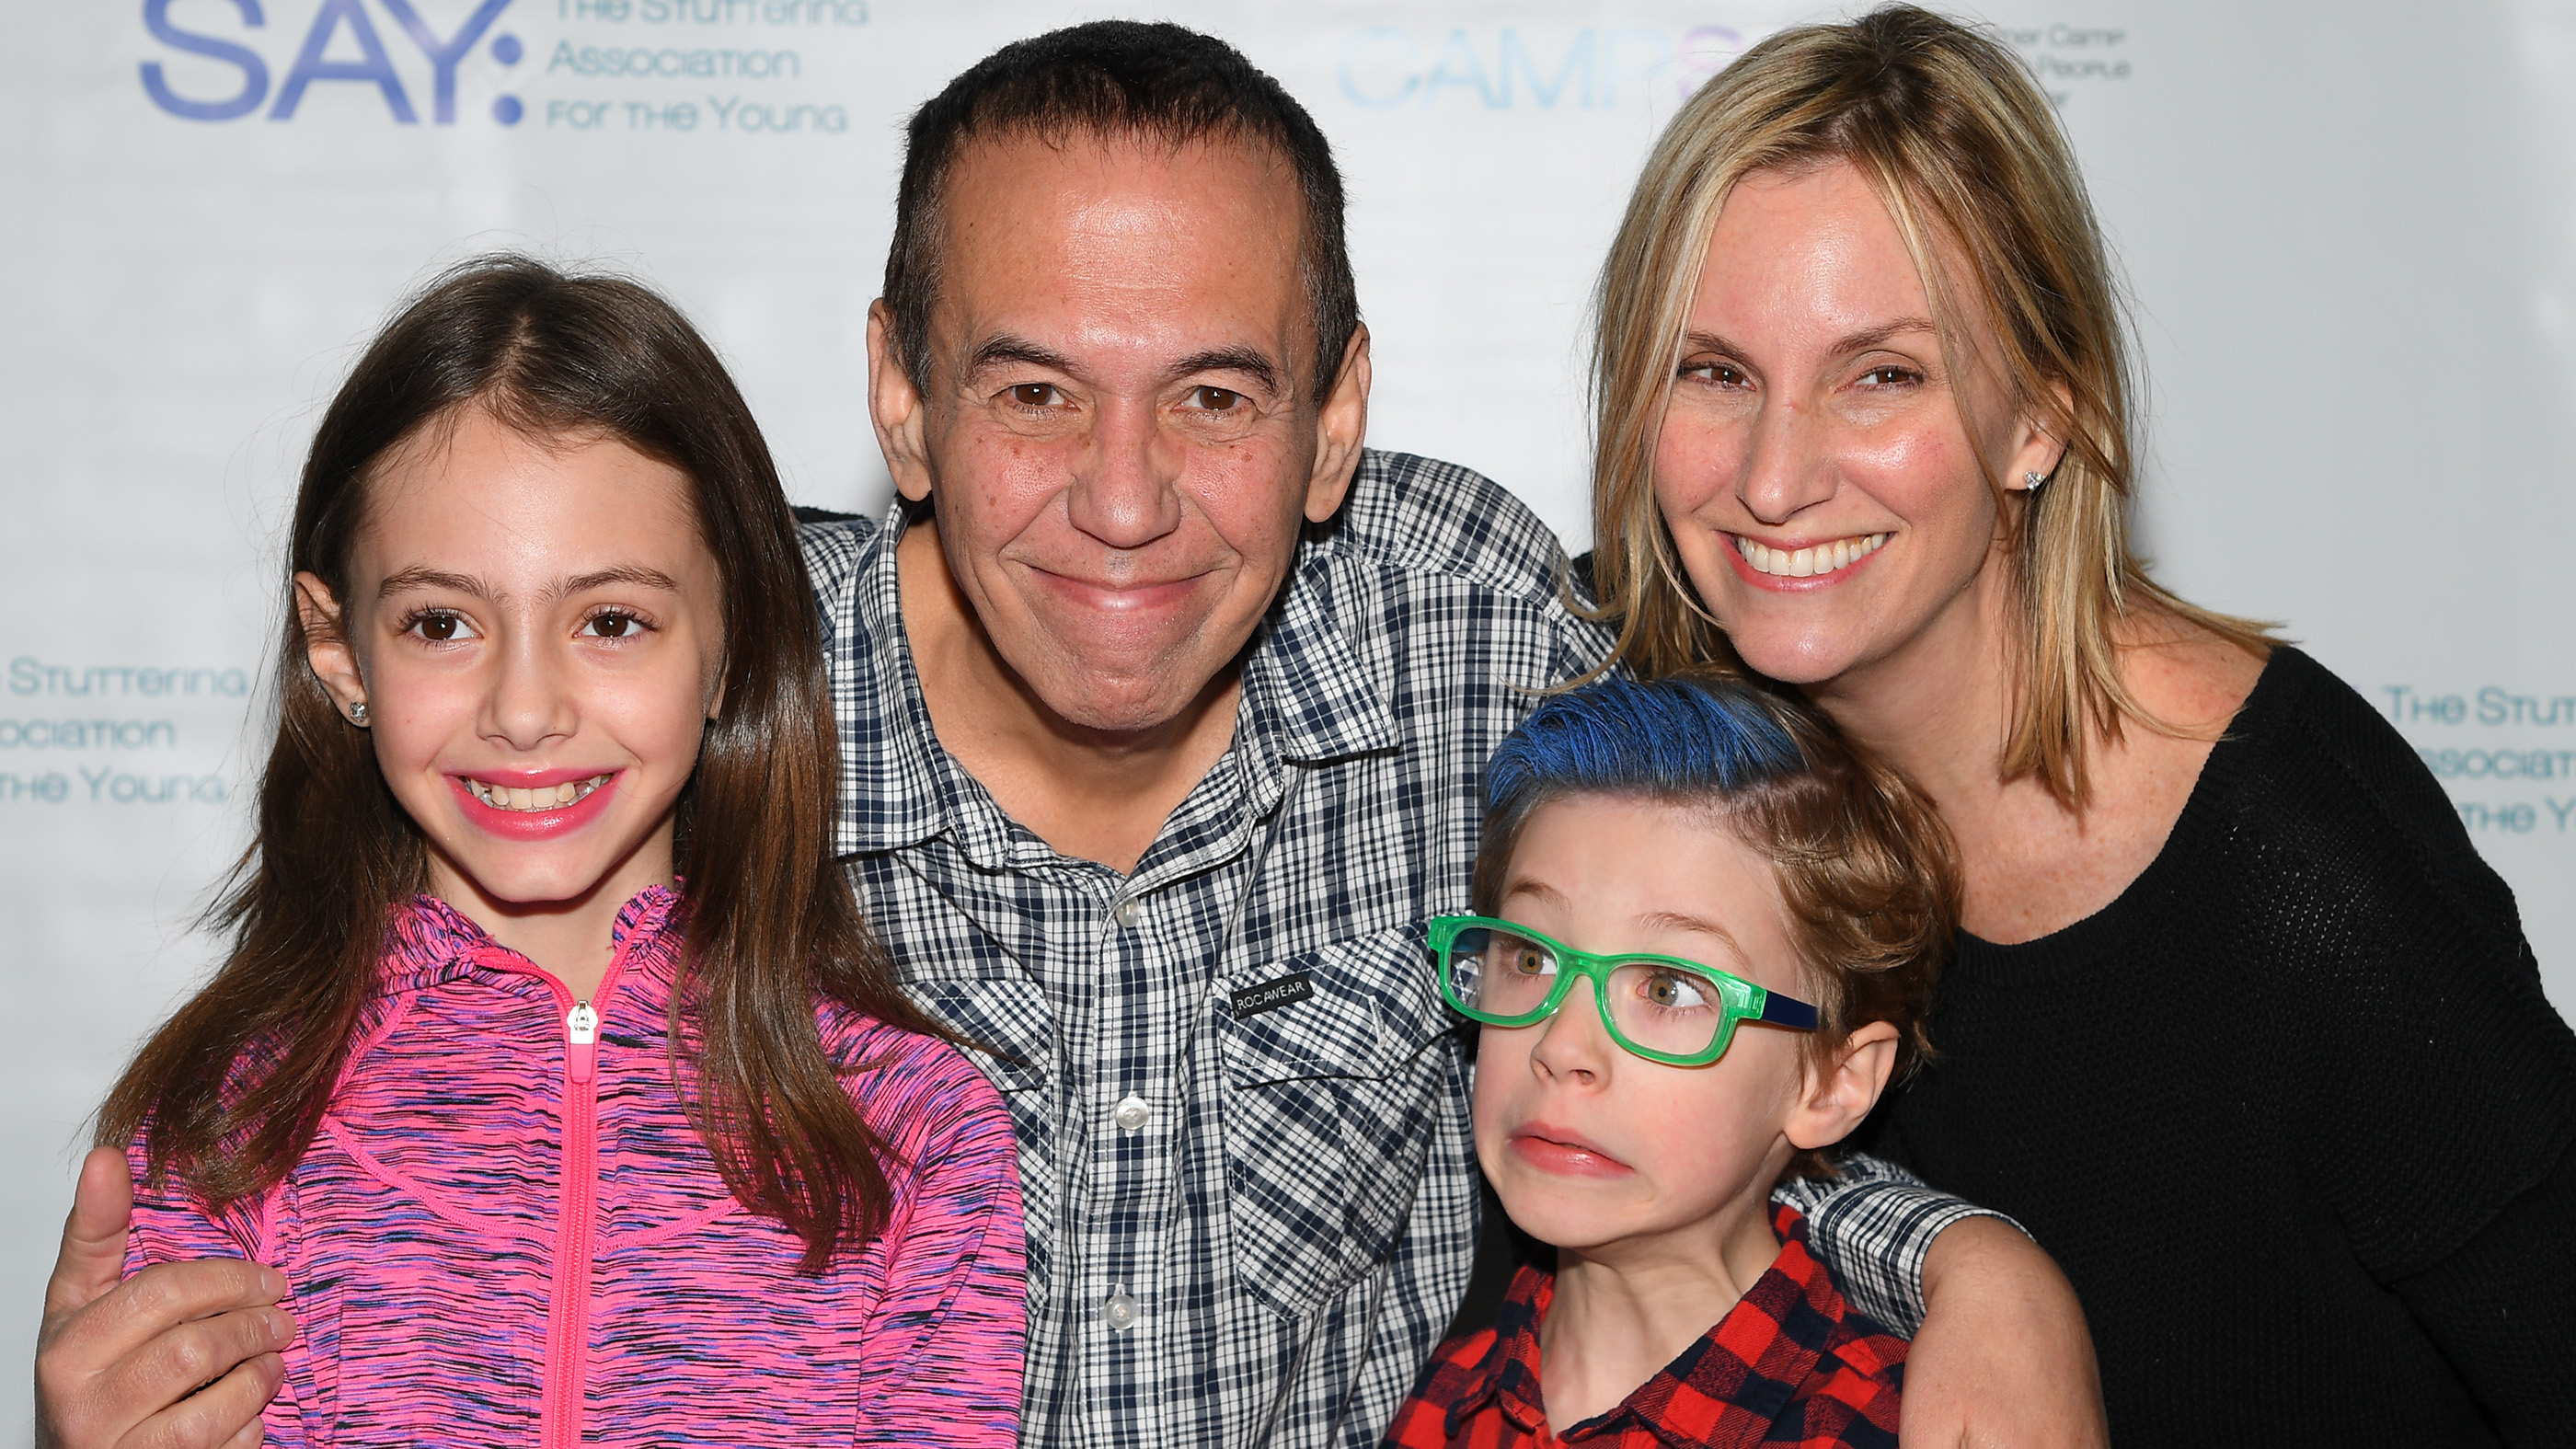 Symptoms of myotonic dystrophy type II tend to show up when someone is in their 20s or 30s. Comedian Gilbert Gottfried, who died at age 67 due to complications from the disorder, is shown here with his wife Dara Gottfried, daughter Lily and son Max Gottfried on Feb. 13, 2017 in New York City.